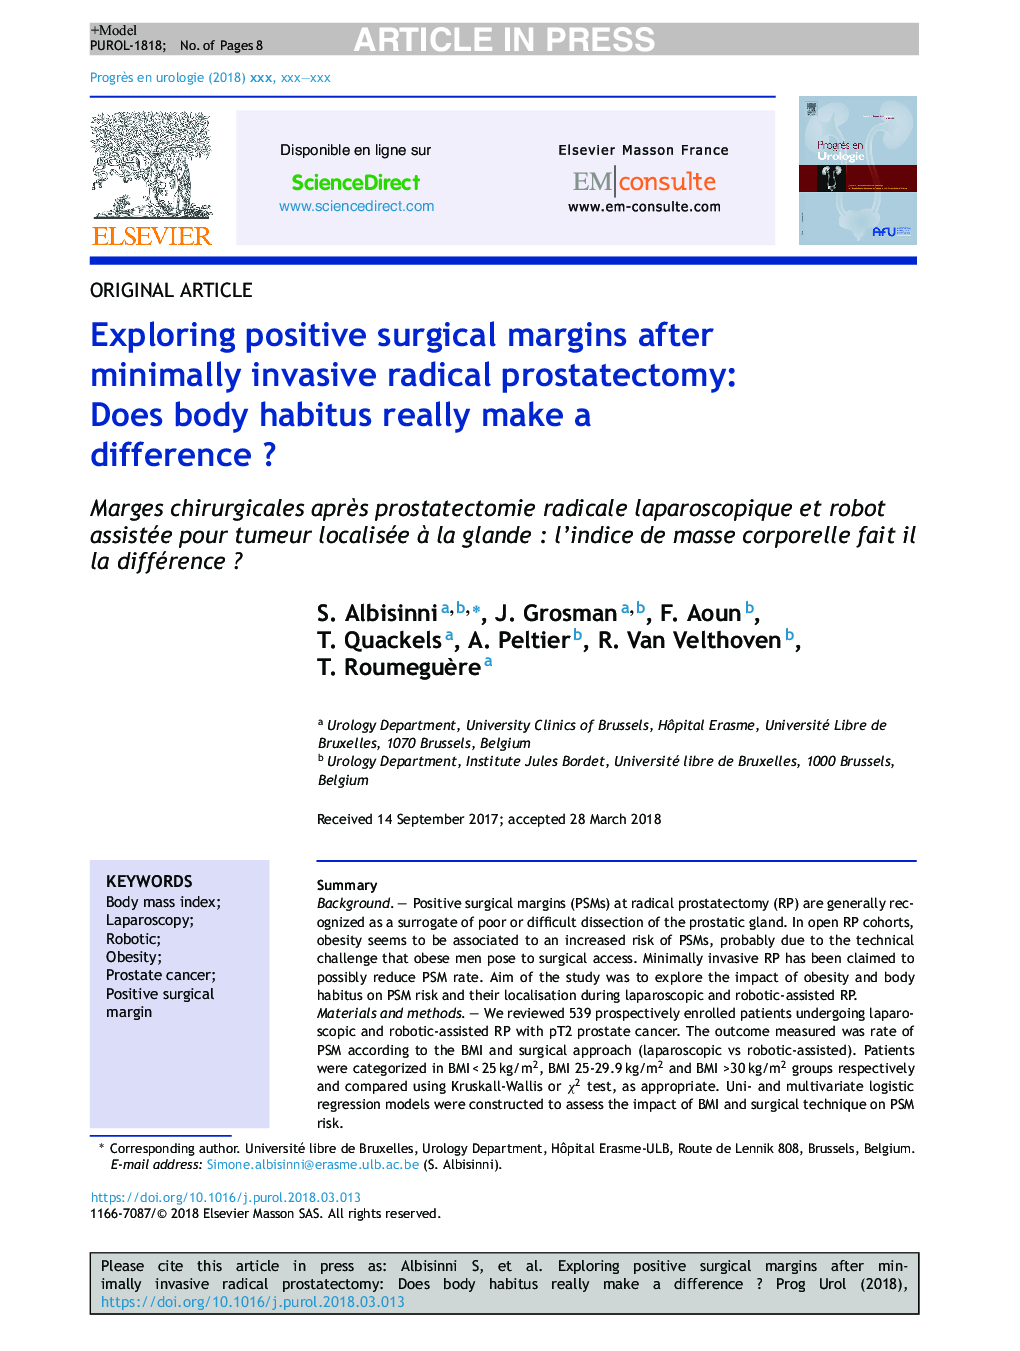 Exploring positive surgical margins after minimally invasive radical prostatectomy: Does body habitus really make a differenceÂ ?